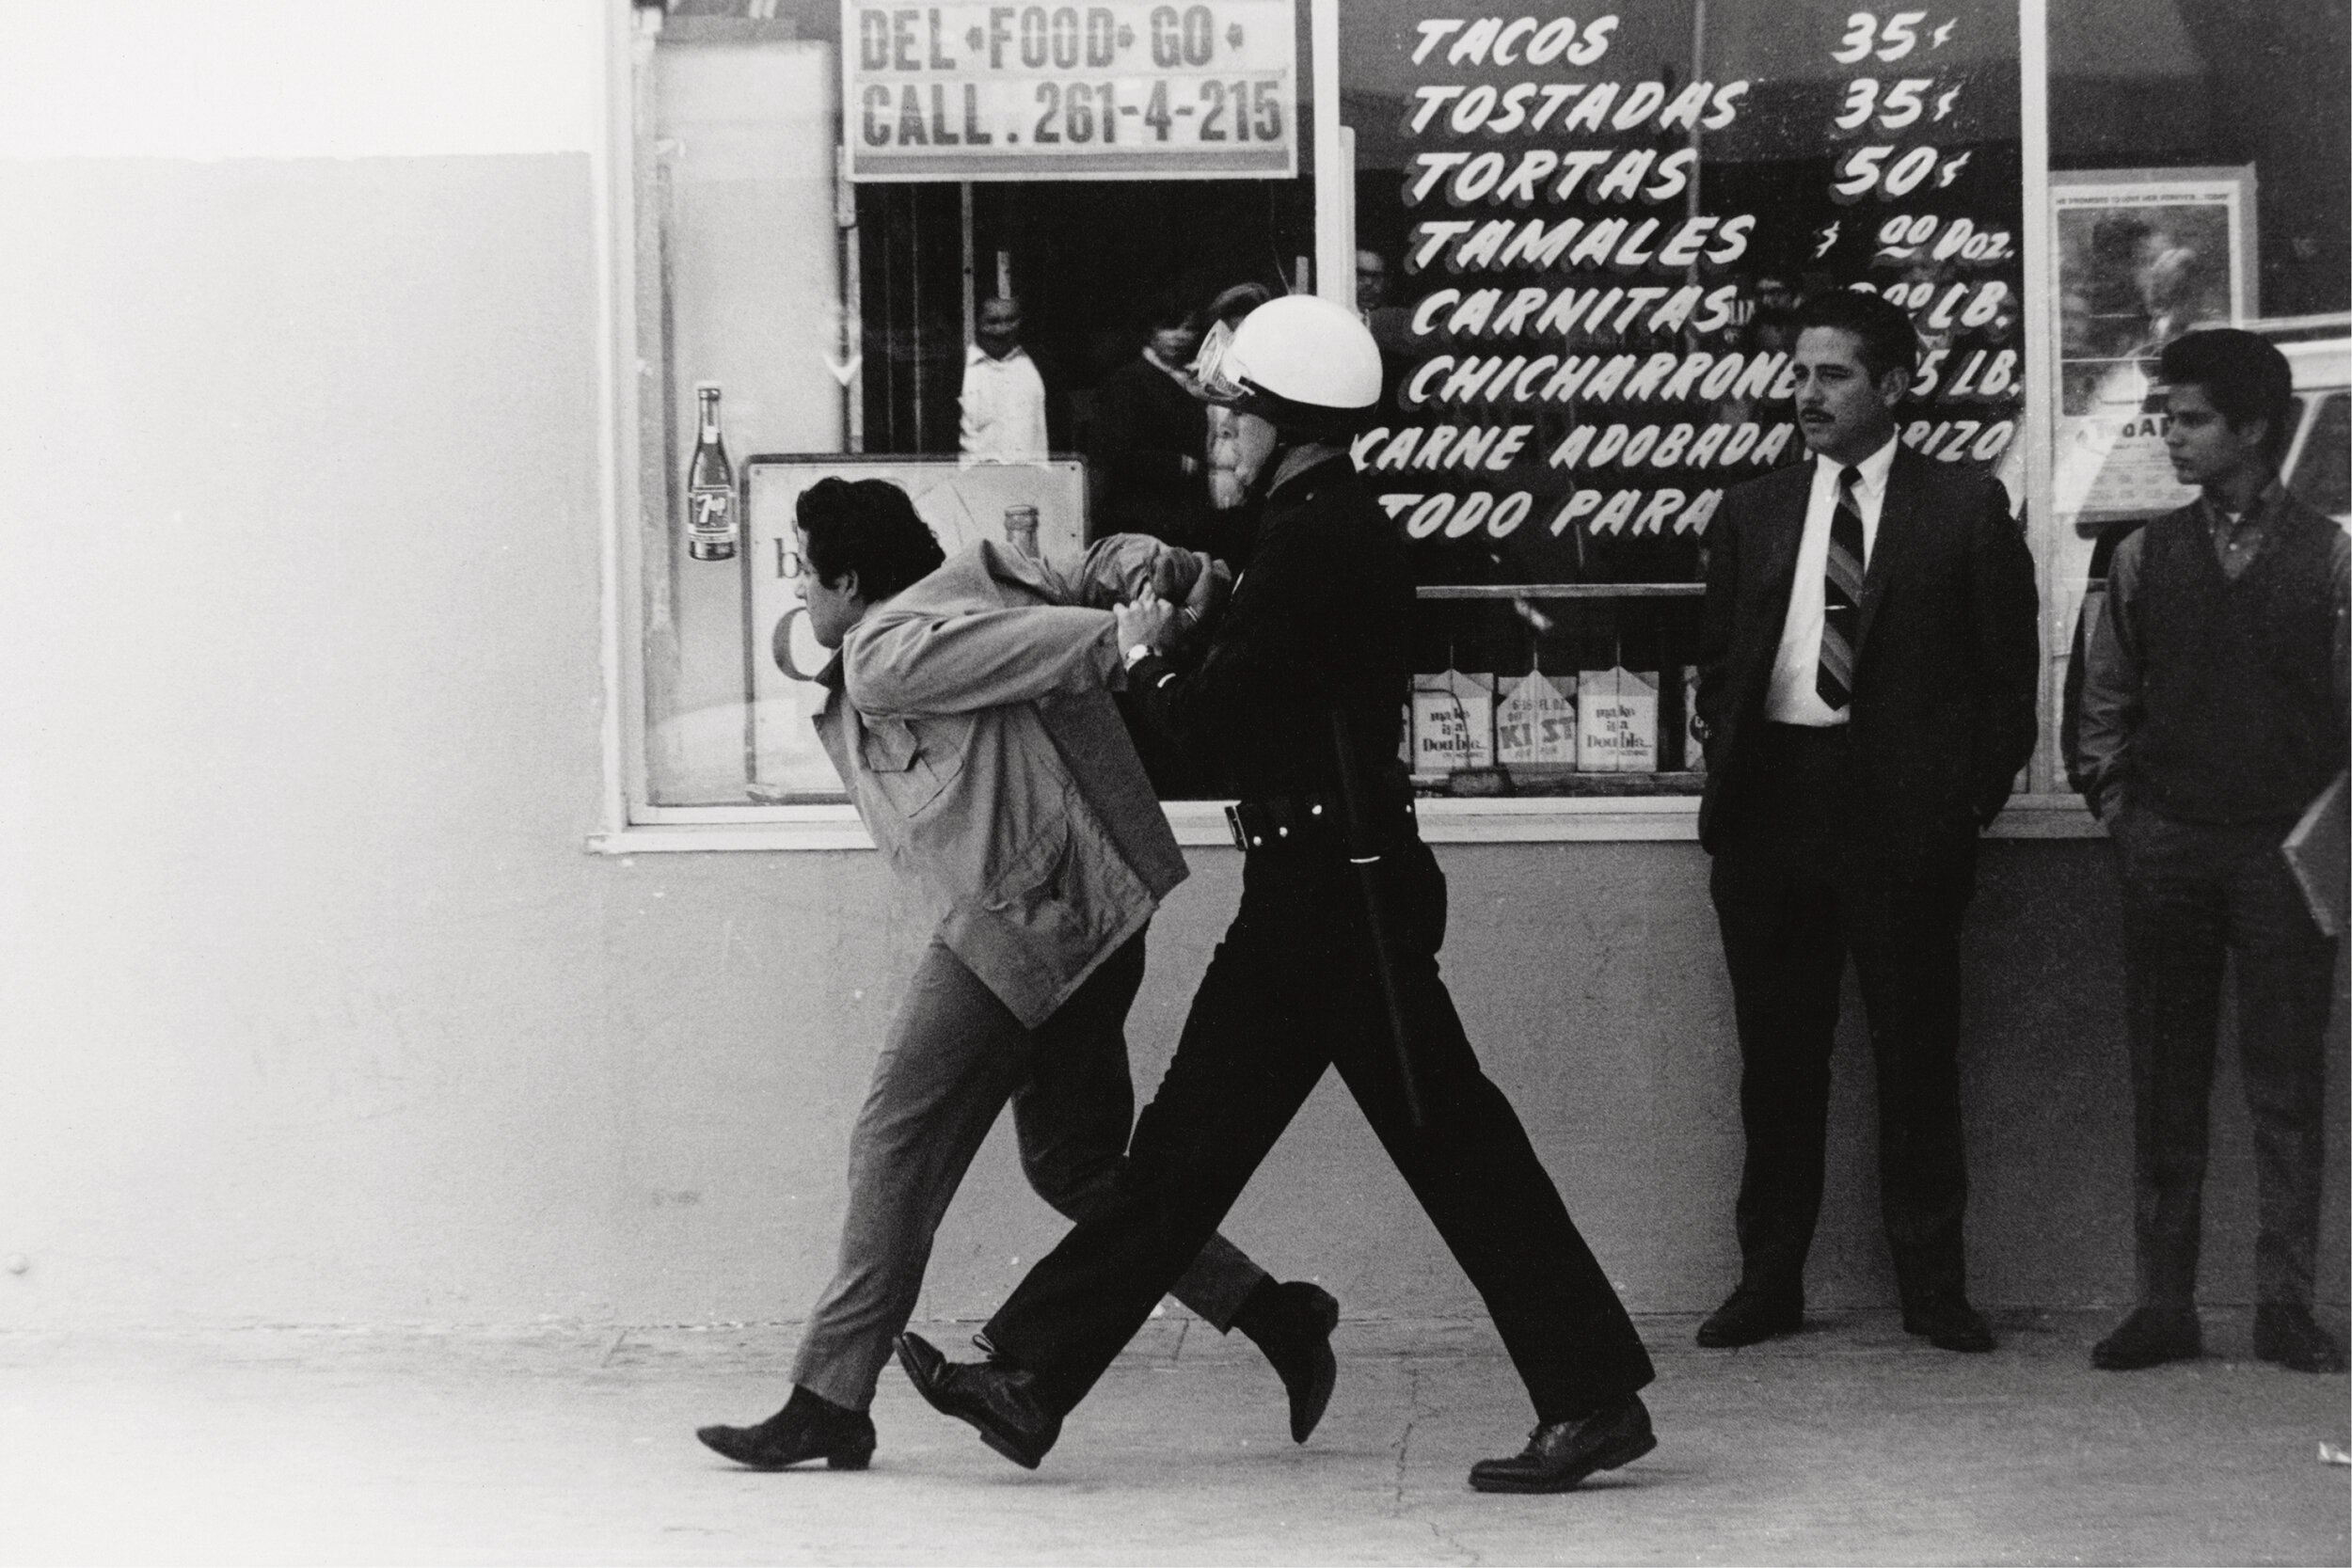 LAPD arresting protester, Boyle Heights, 1970